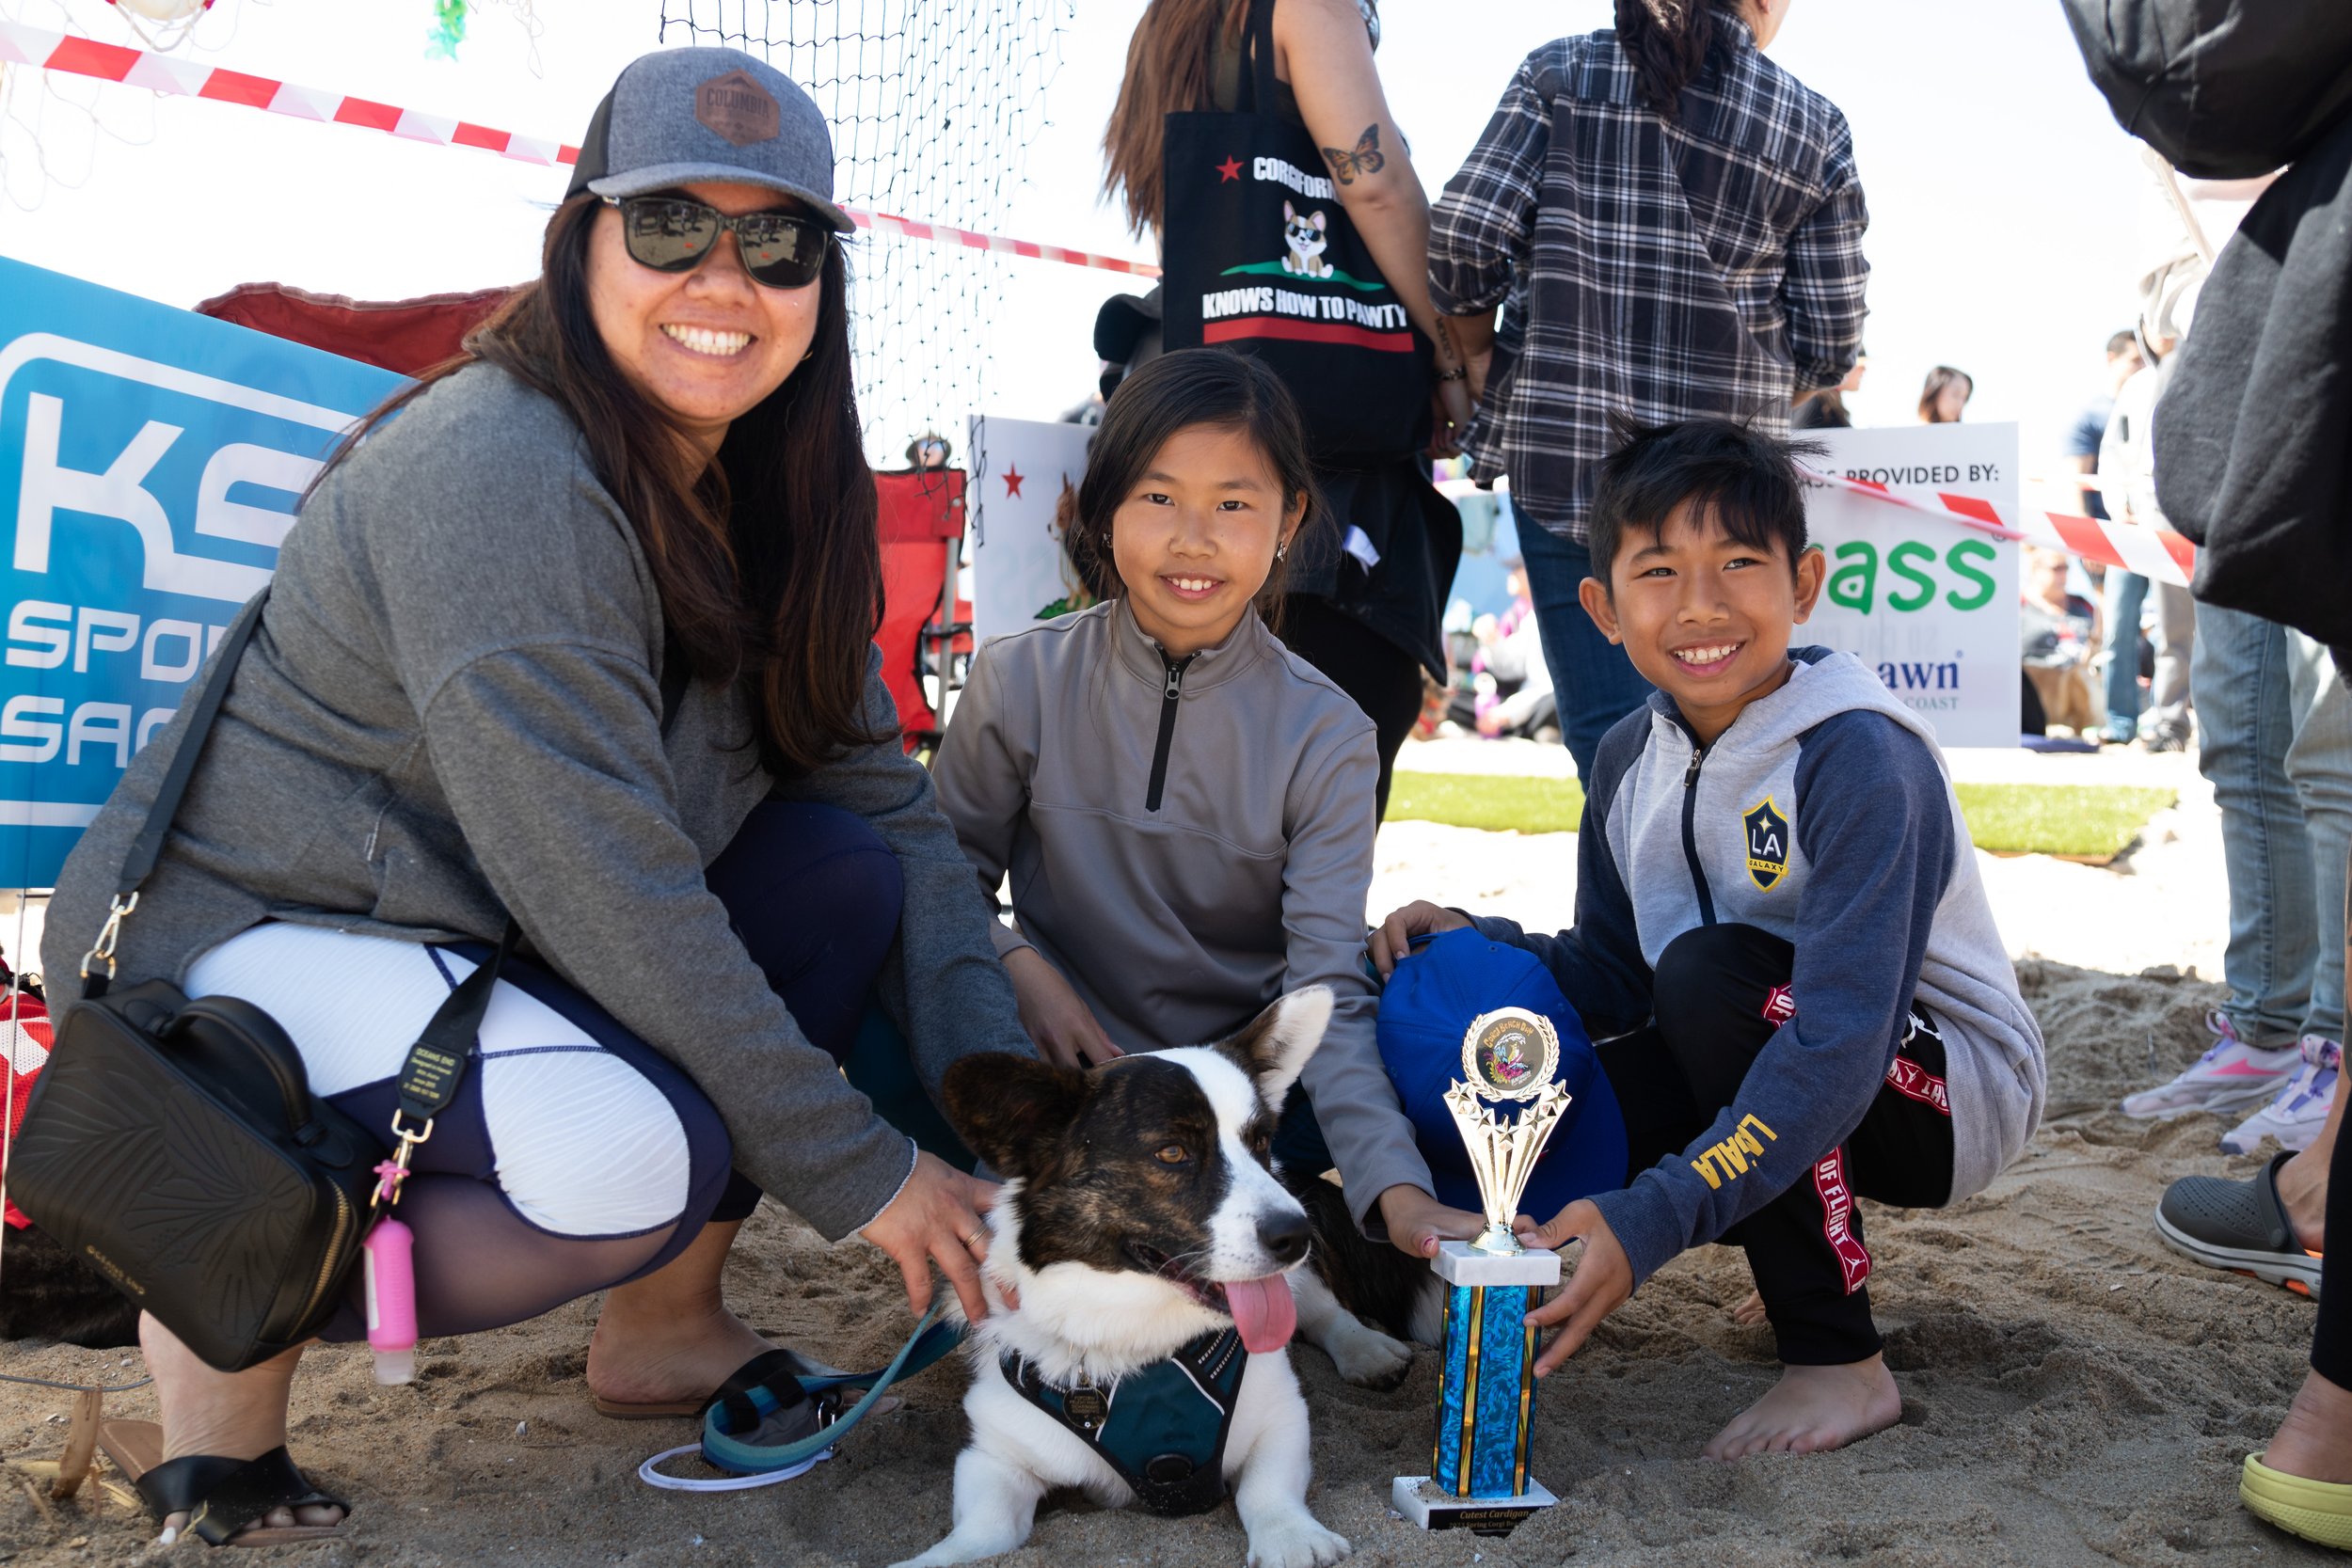  Christina Pruchyanimit (left), her children, and her dog, Popcorn, after winning the Cutest Corgi Cardigan Contest during Corgi Beach Day at Huntington Dog Beach, Huntington Beach, Calif., on Saturday, April 1, 2023. There were over a thousand peopl